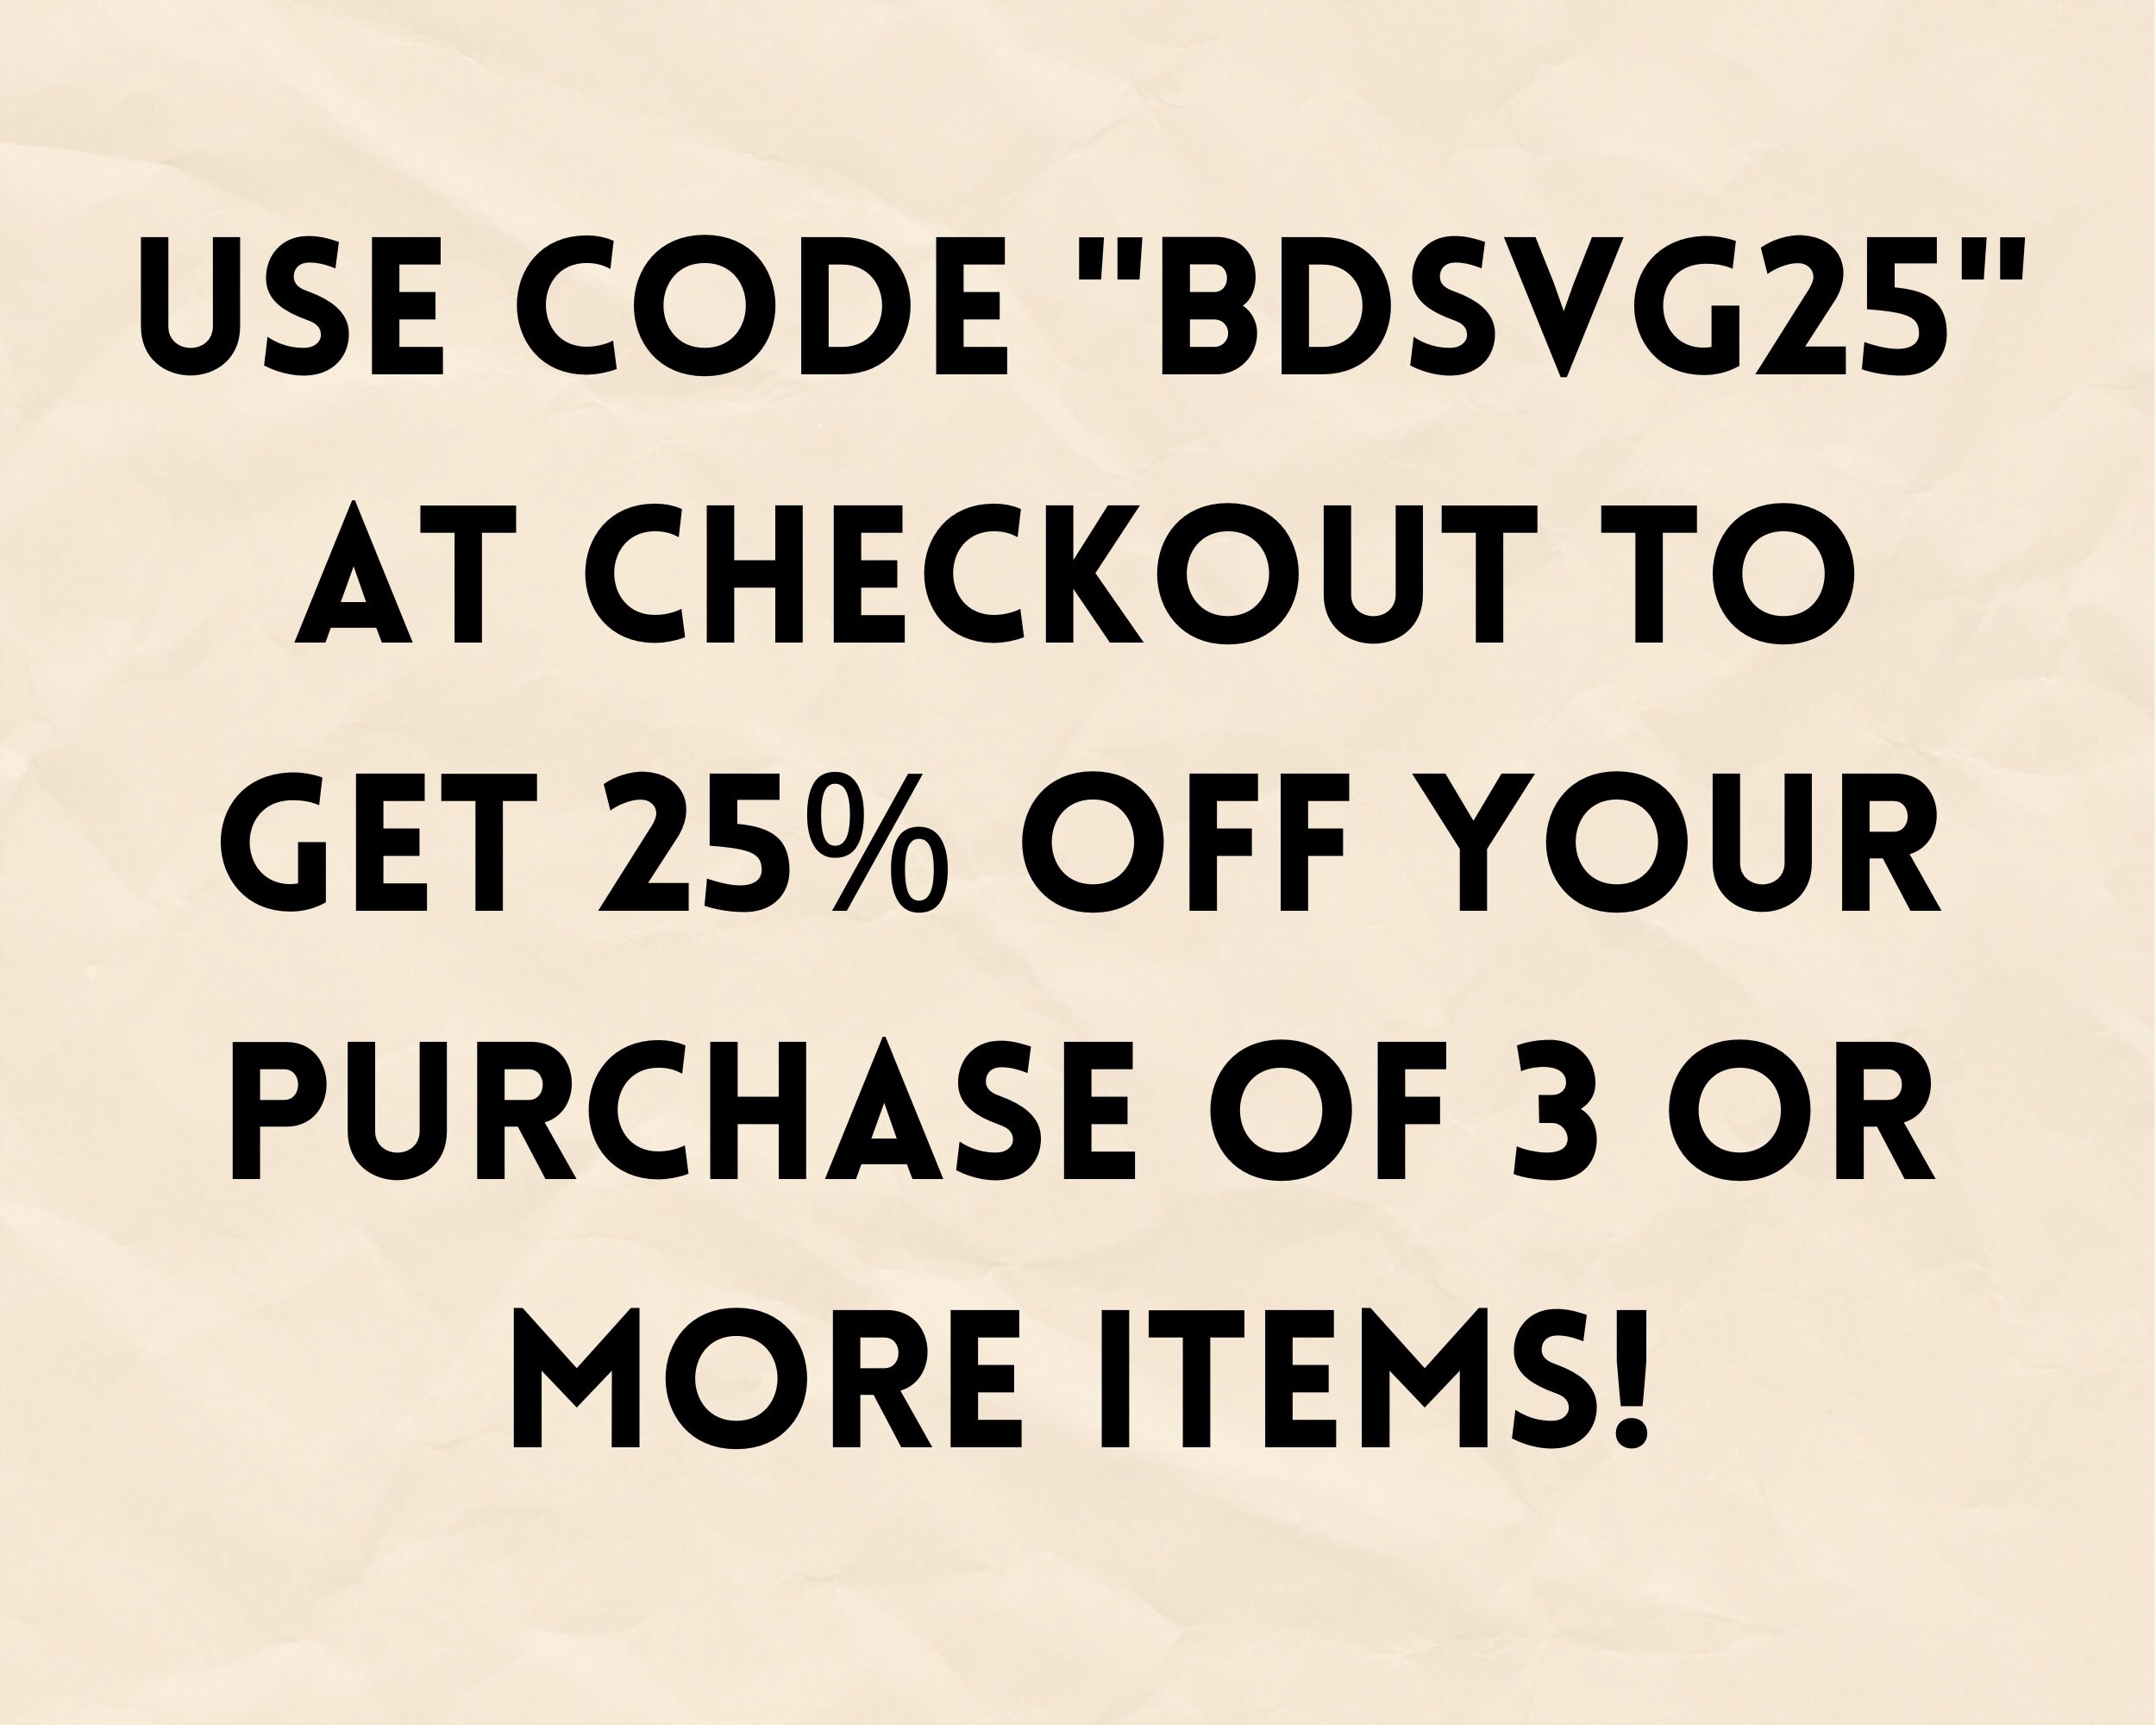 Use code FRIENDS25 for 25% off sitewide until October 15th, make sure